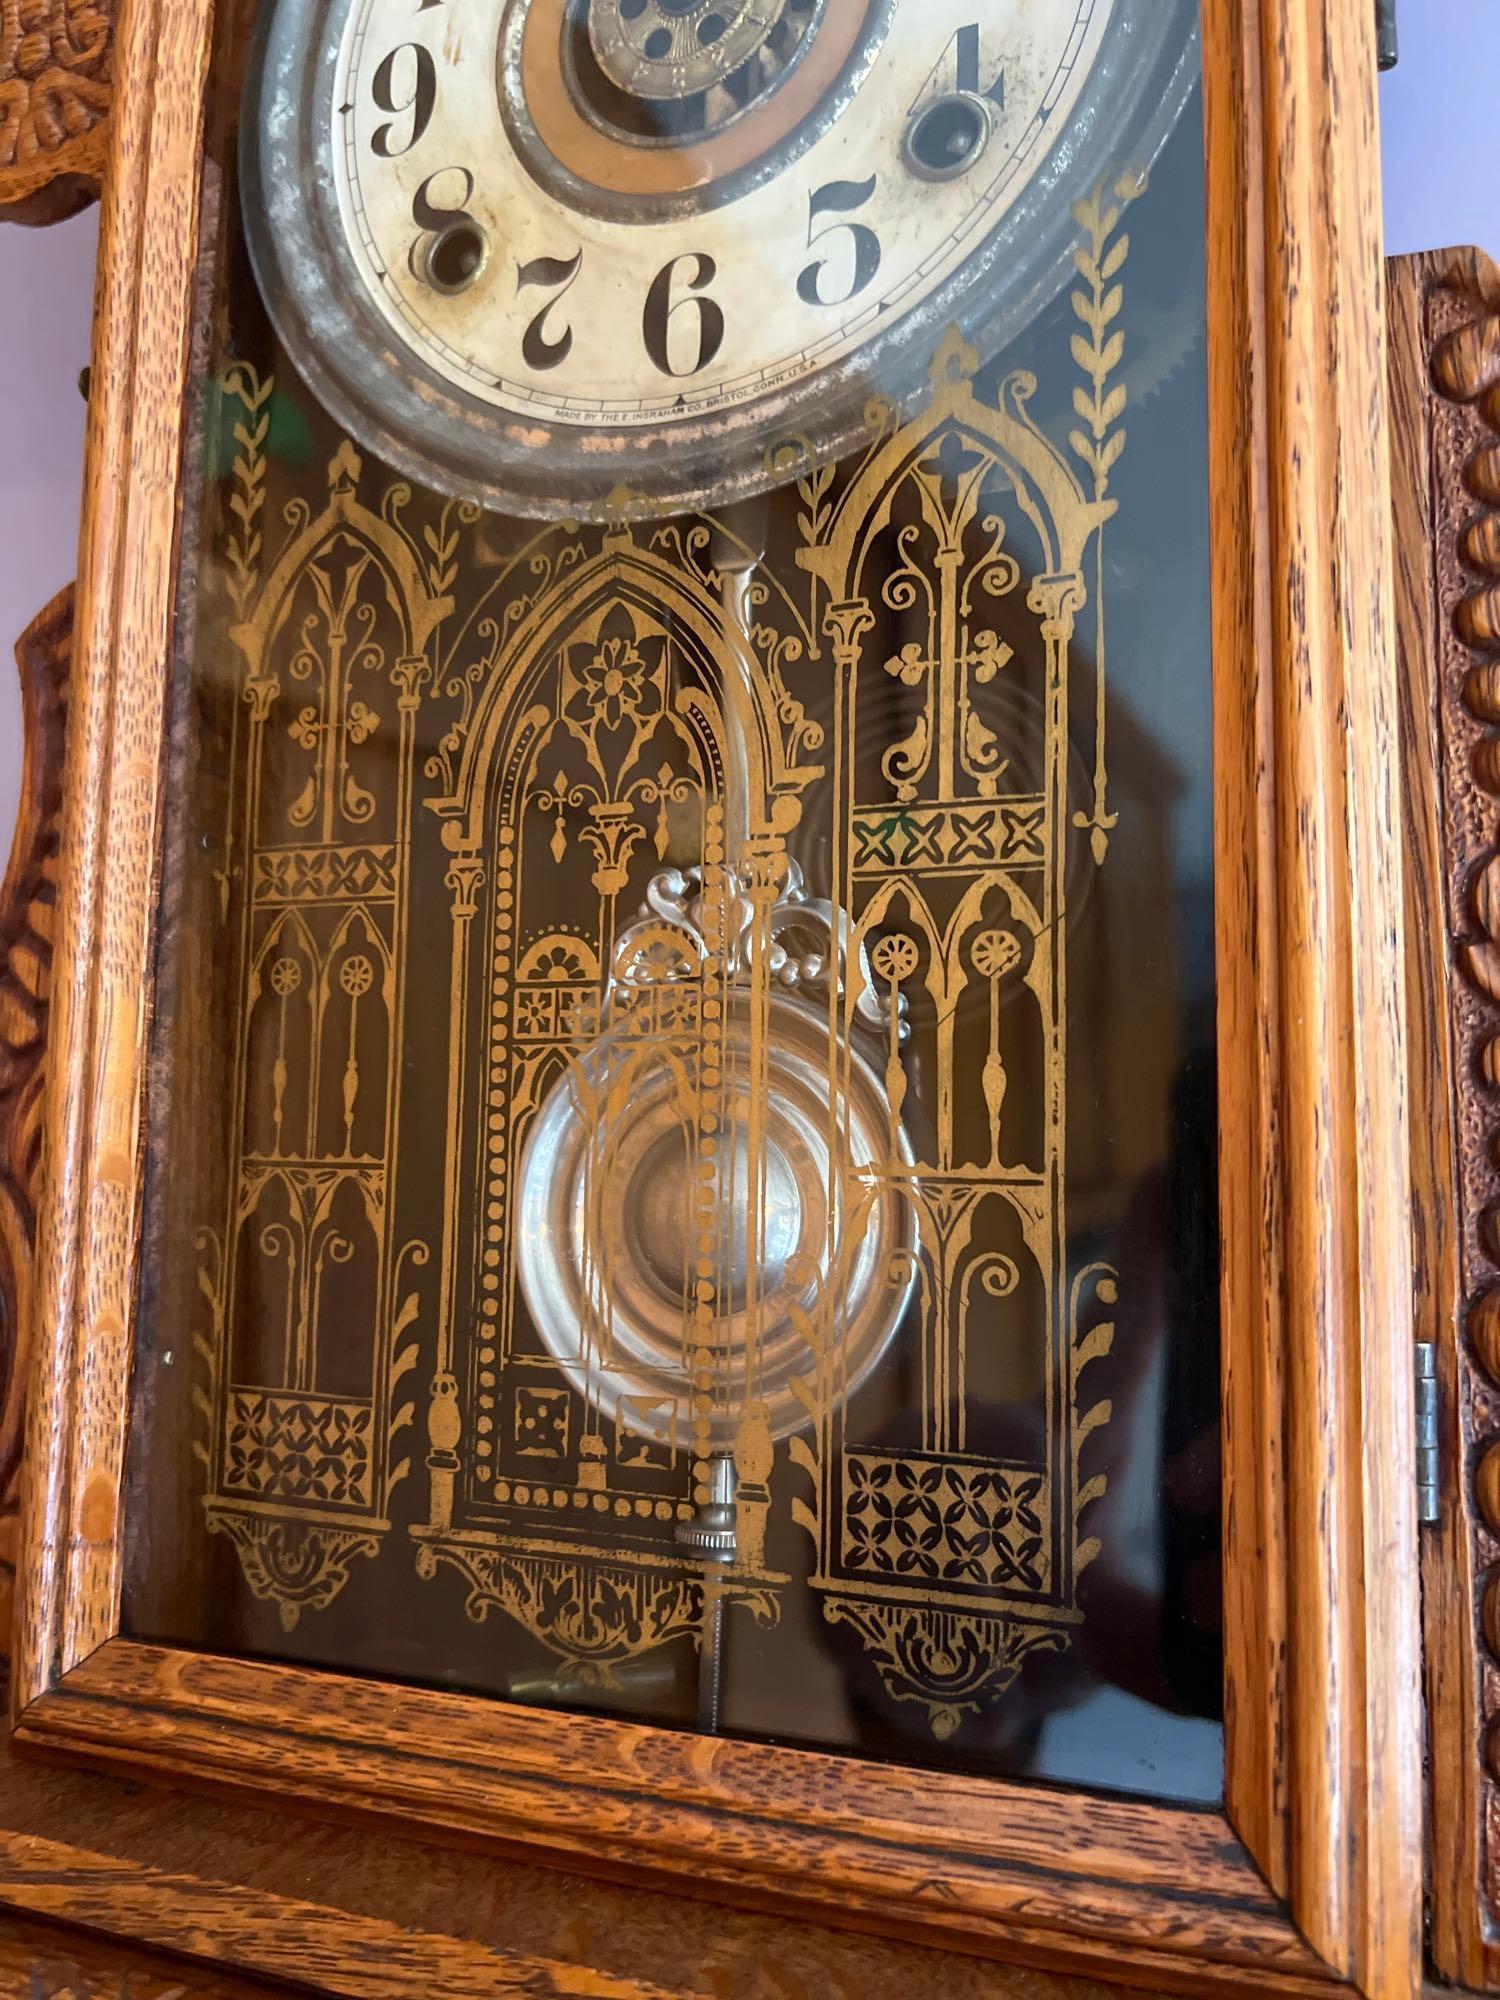 Vintage Mantle Clock 22 in Tall